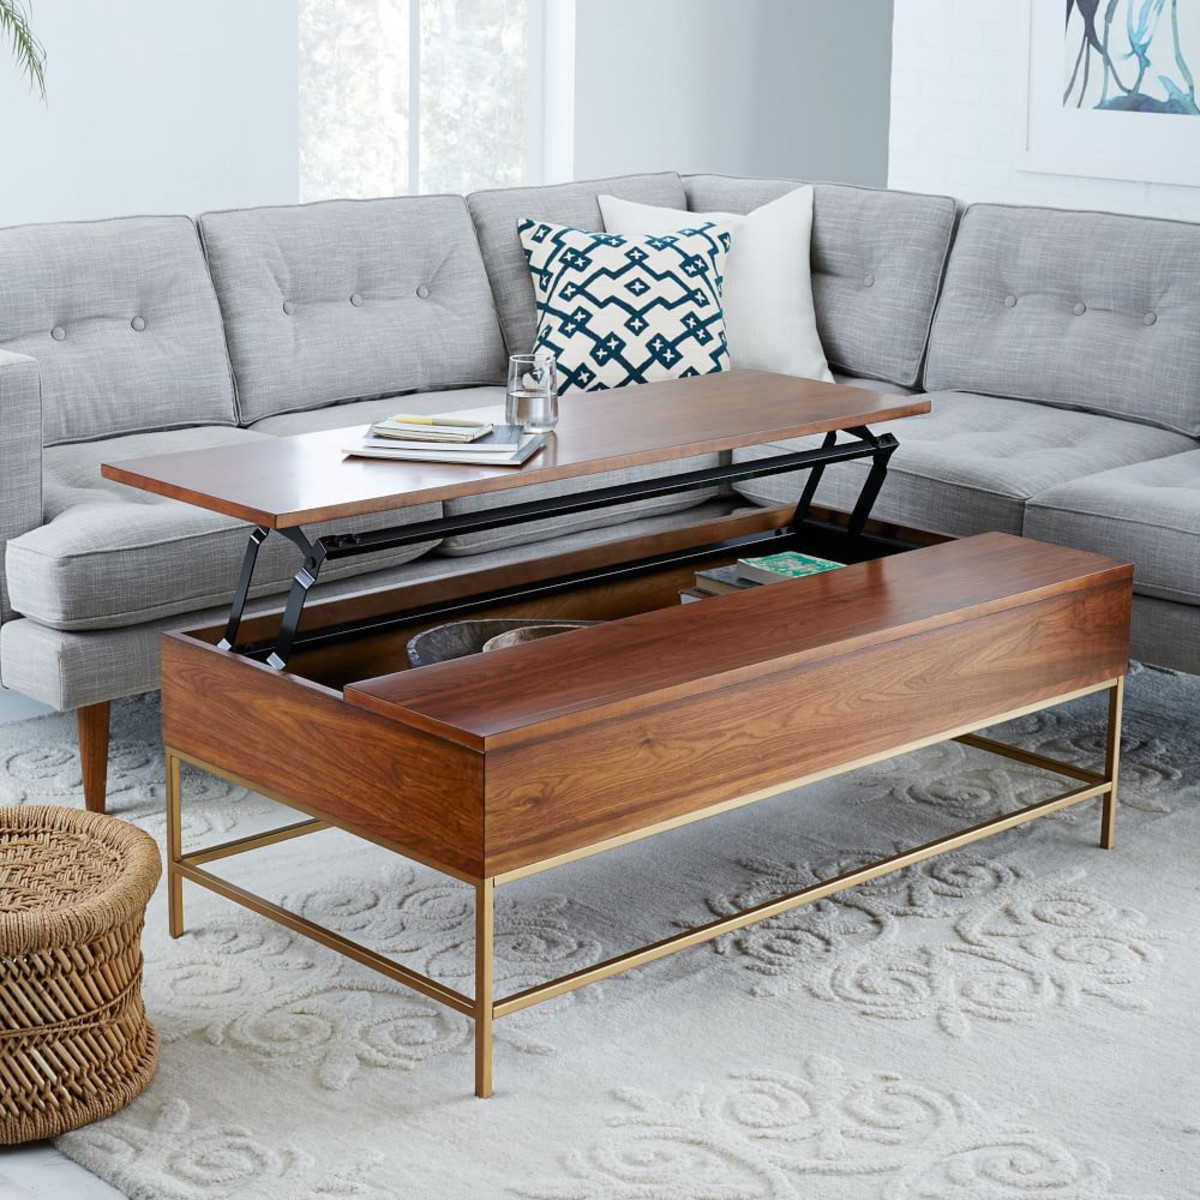 Living Room Coffee Tables
 8 Best Coffee Tables For Small Spaces